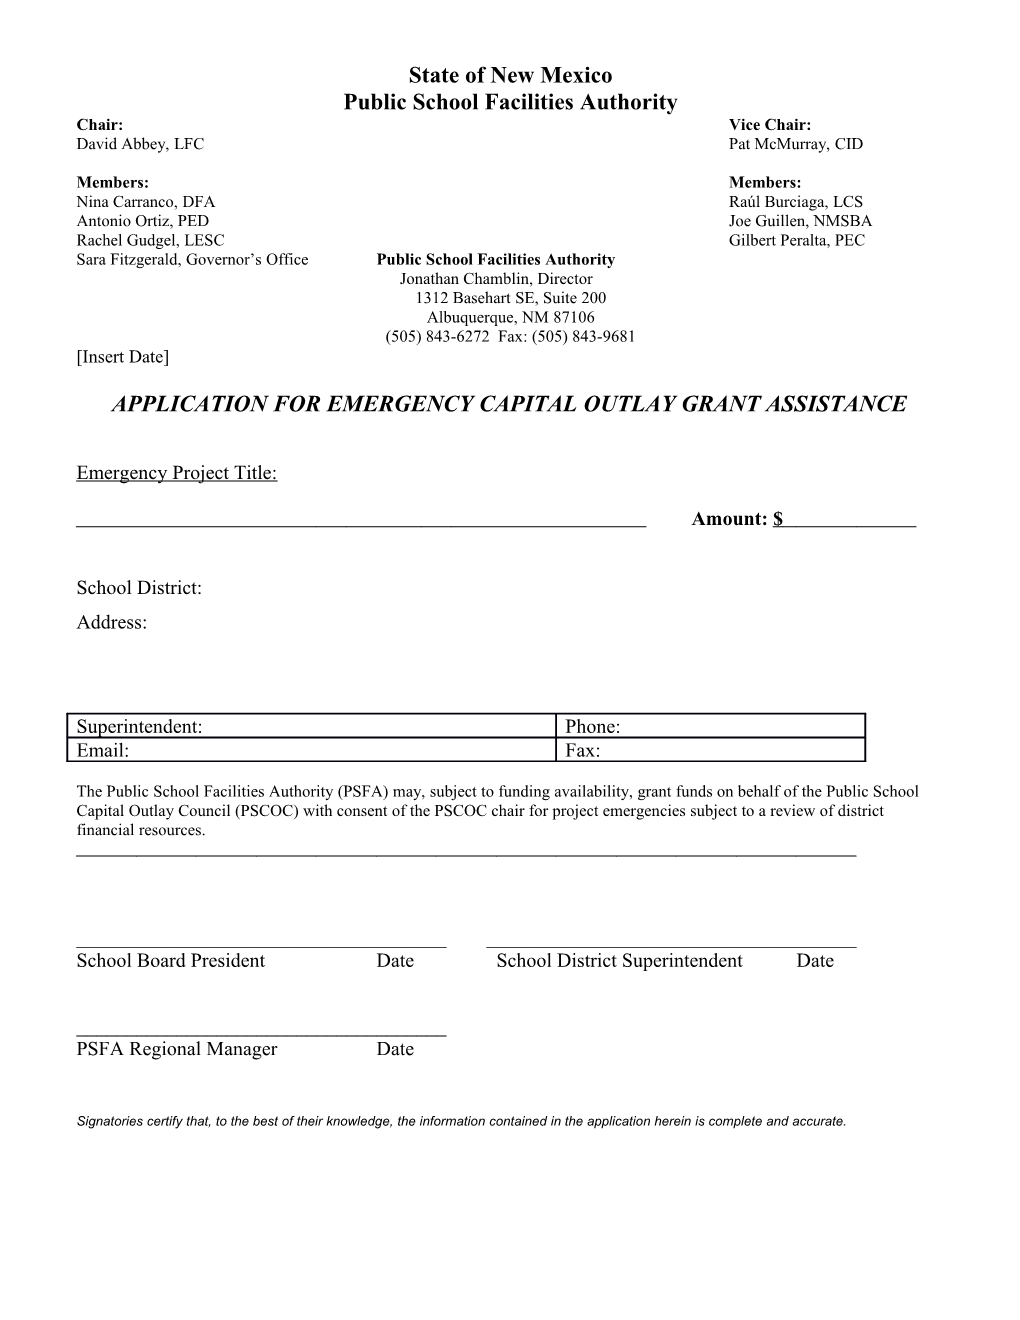 Application for Emergency Capital Outlay Grant Assistance